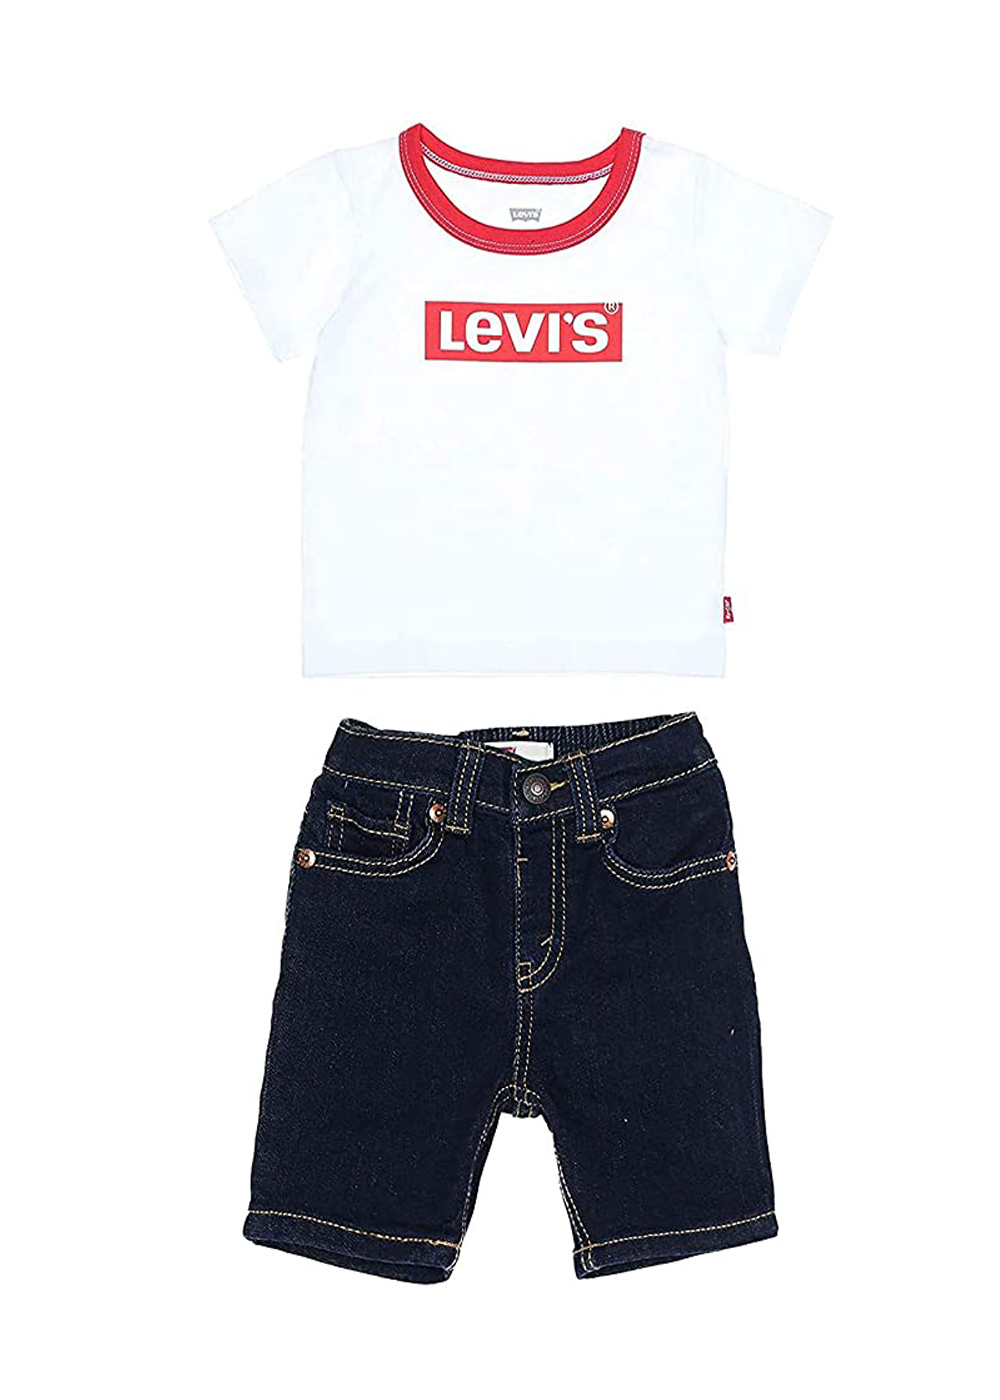 Featured image for “LEVI'S COMPLETINO”